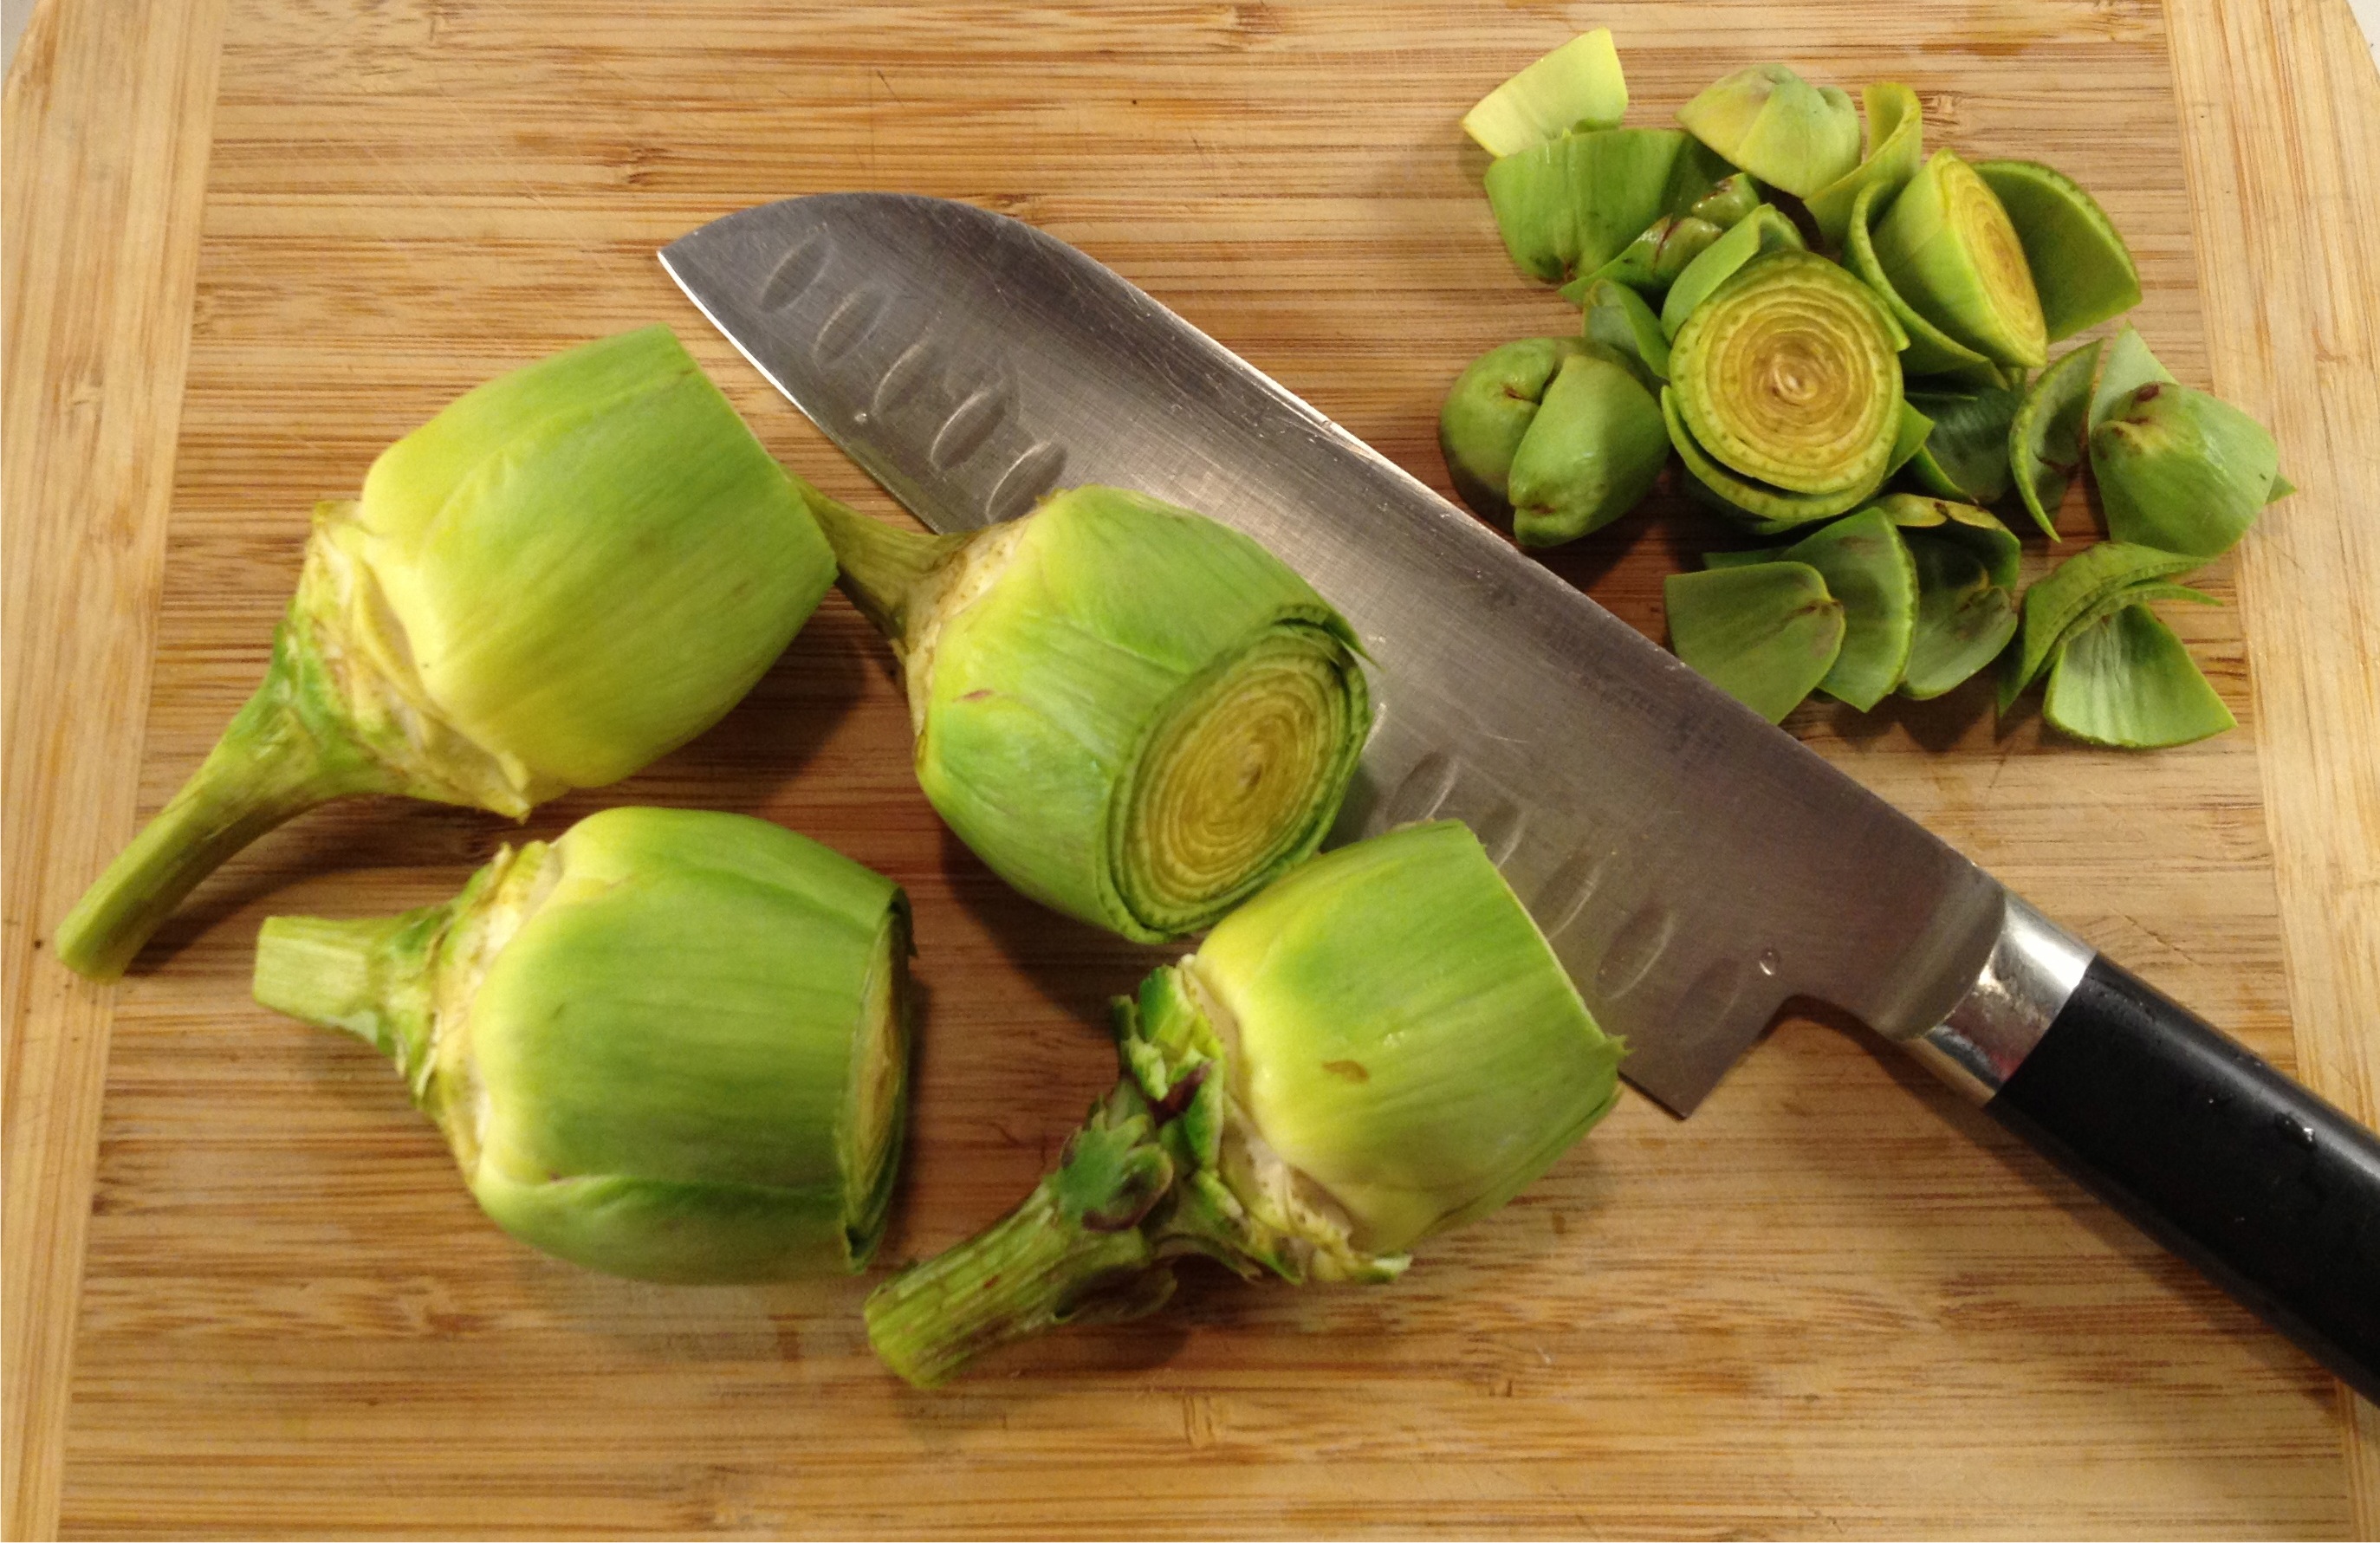 Baby artichokes on cutting board from May 11, 2013.